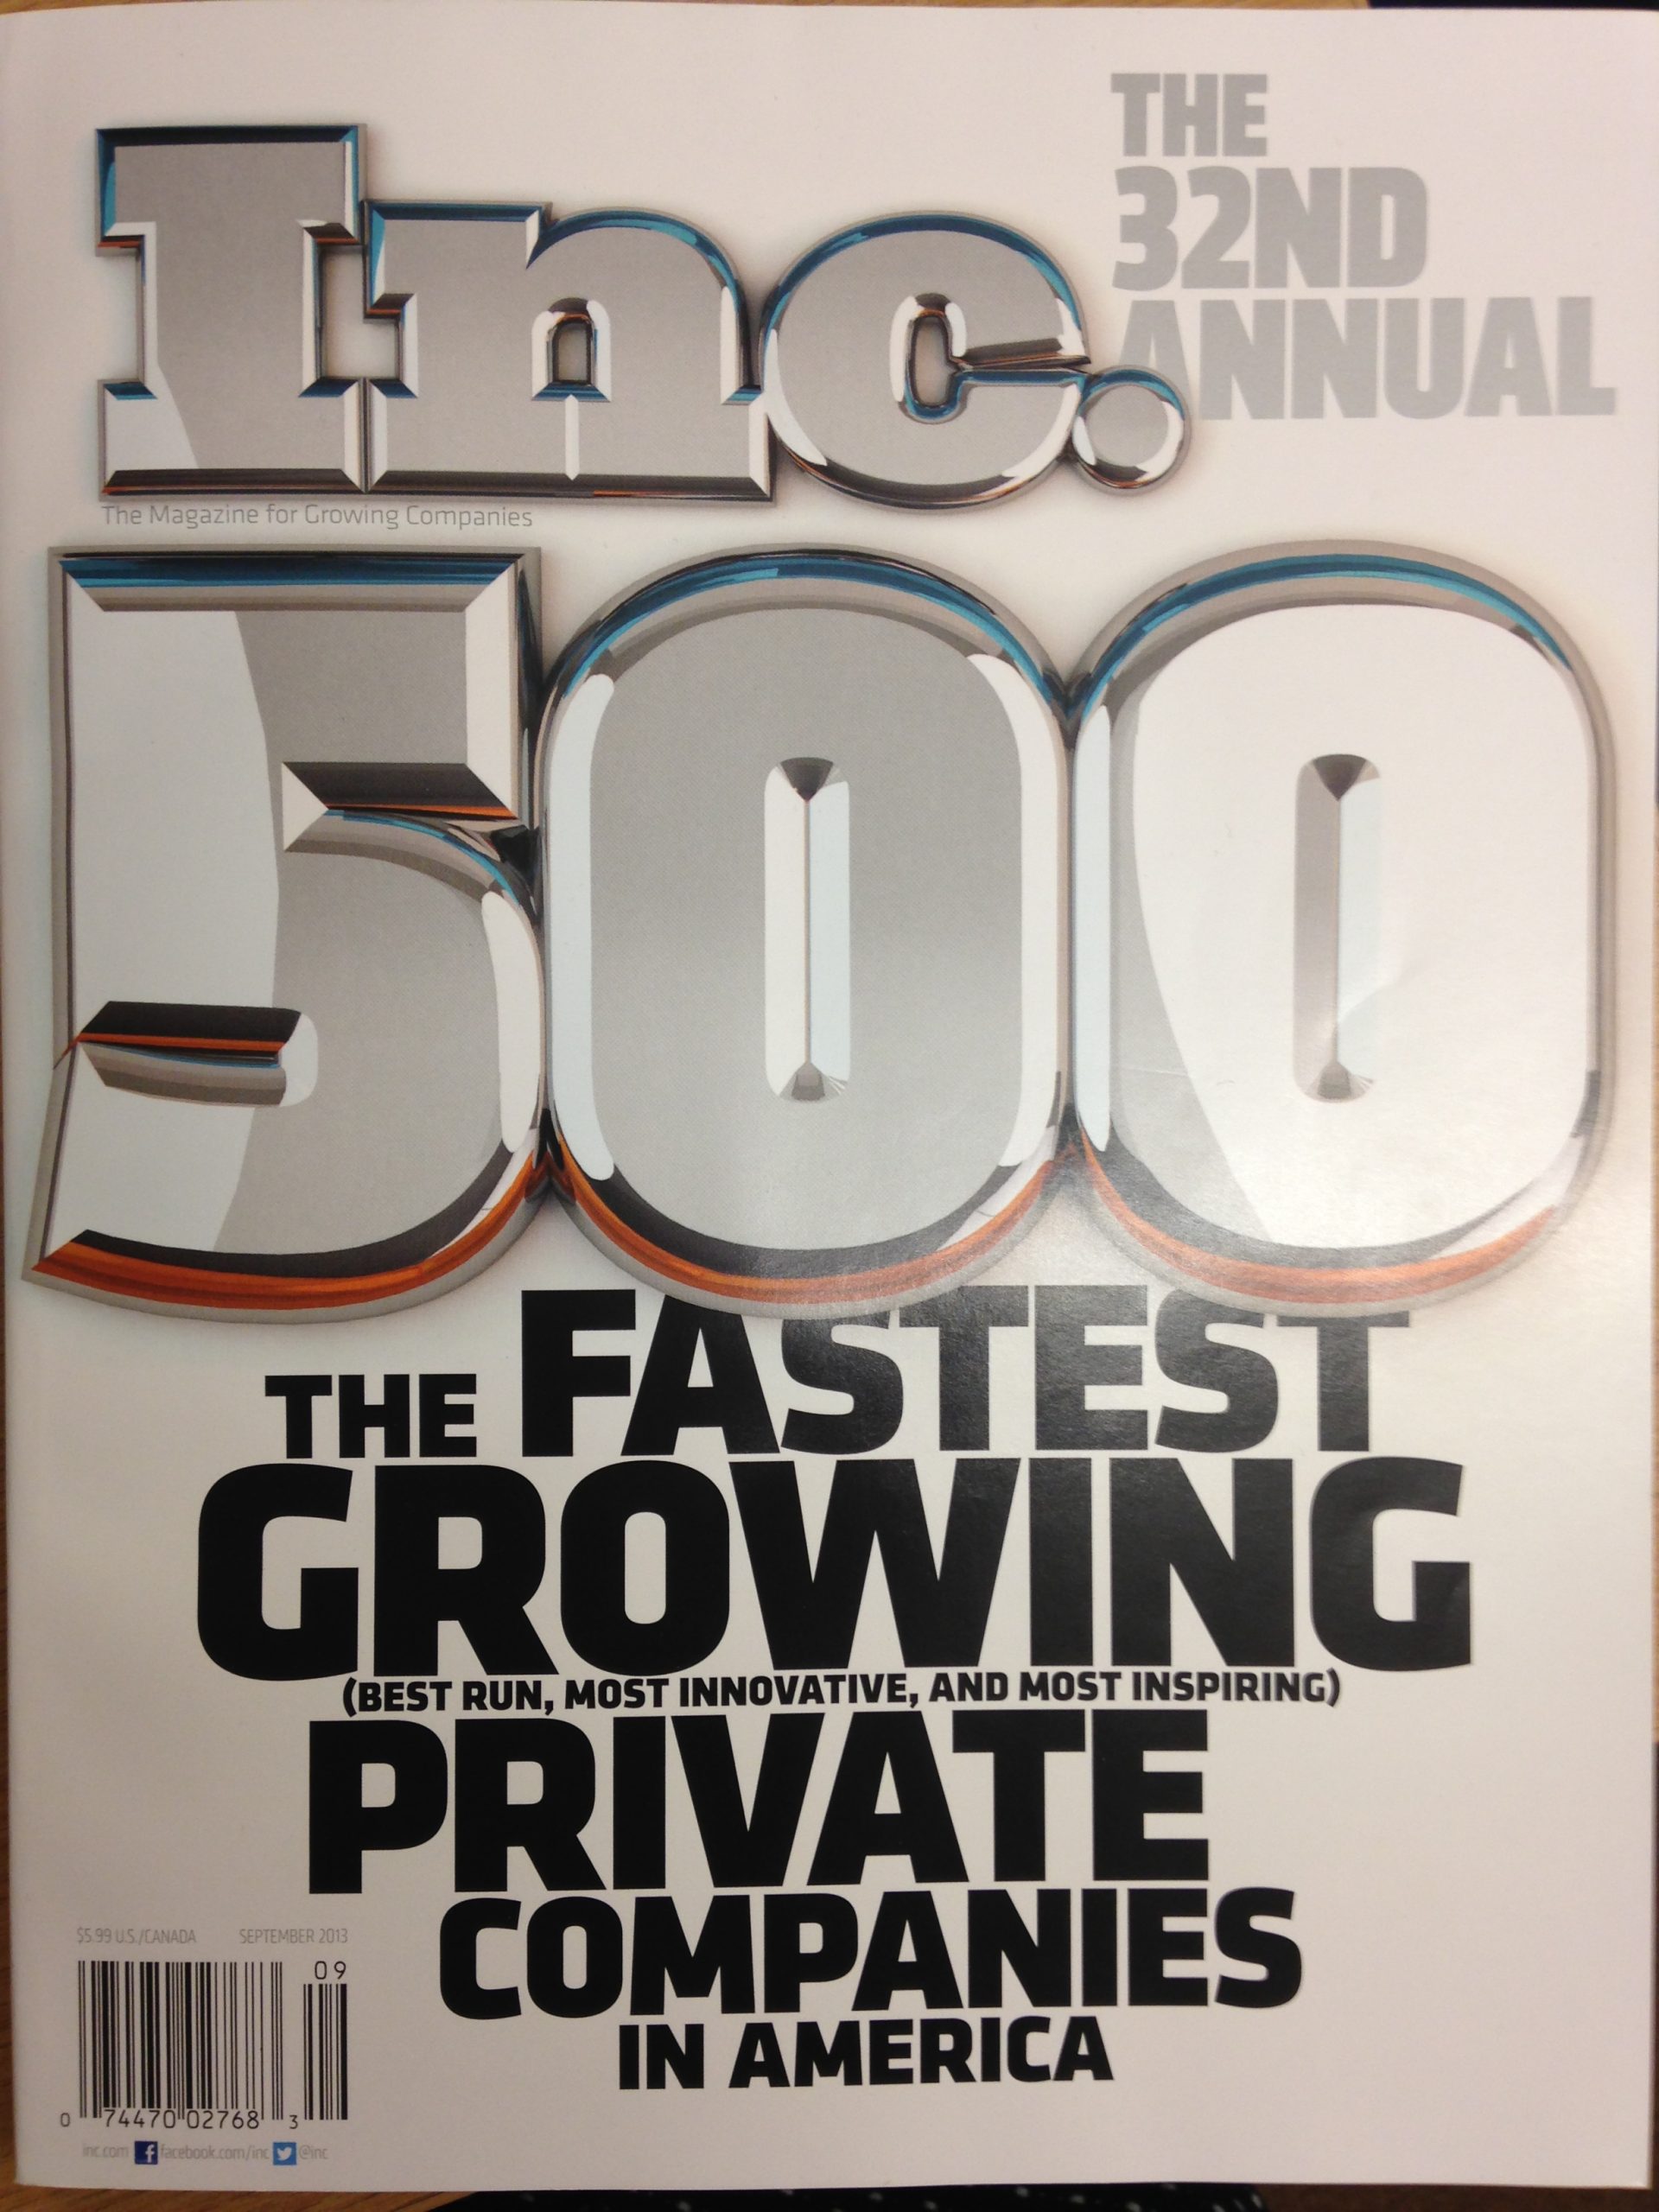 Content marketing agency Brafton made the Inc. 500 list of fastest growing companies for the second consecutive year.